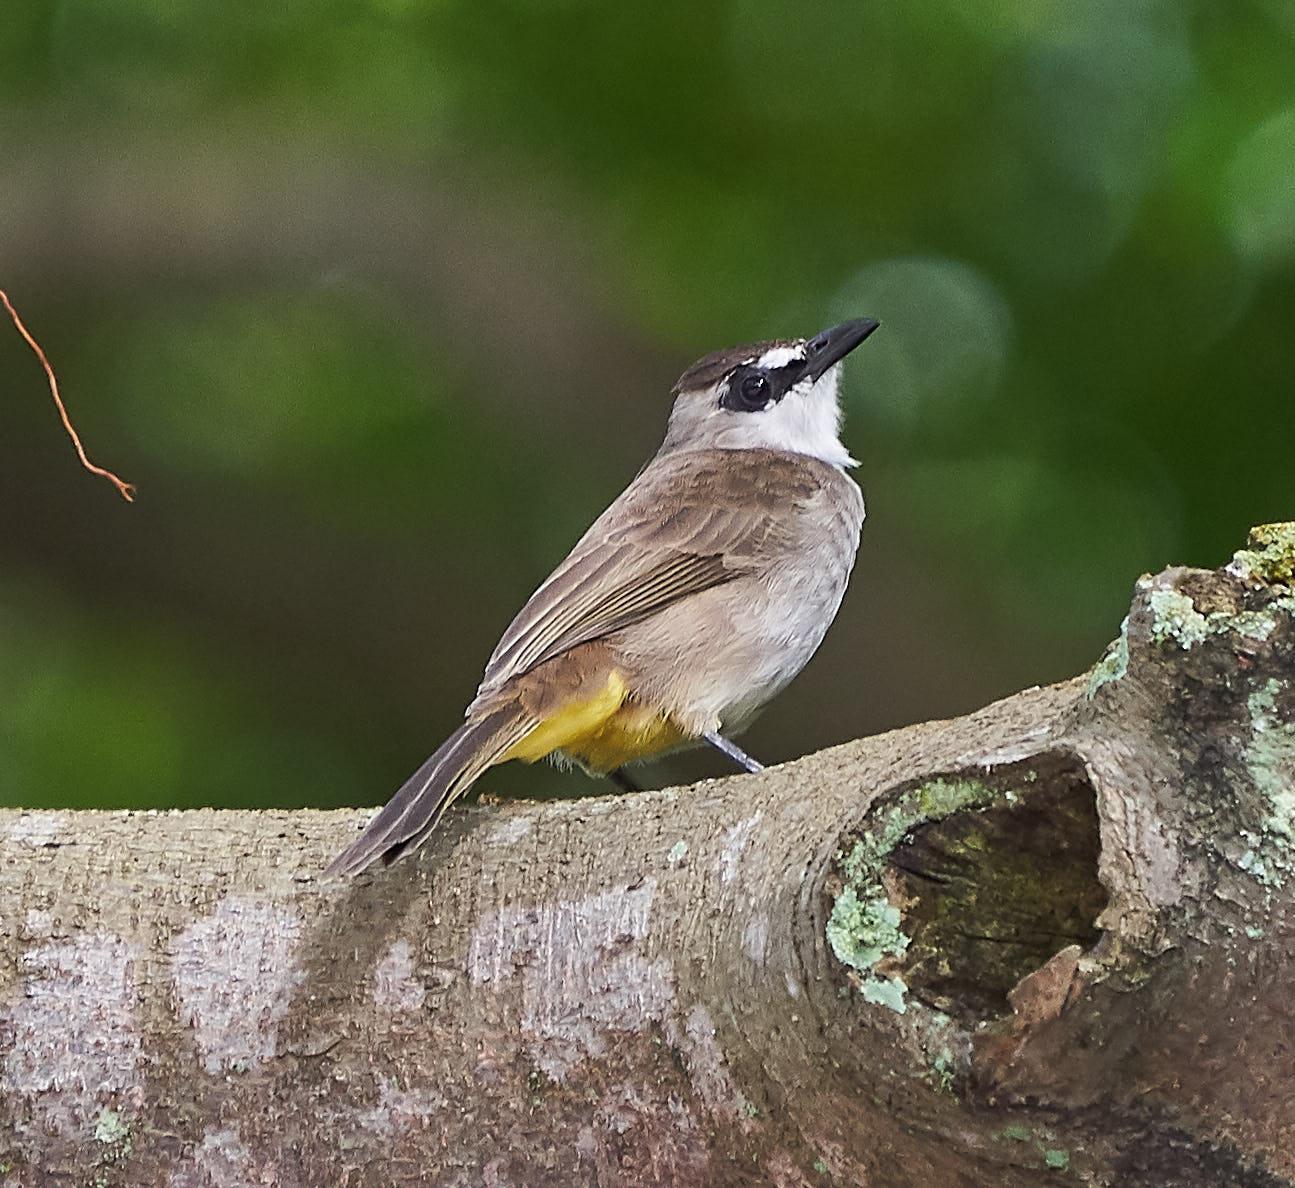 Yellow-vented Bulbul Photo by Steven Cheong